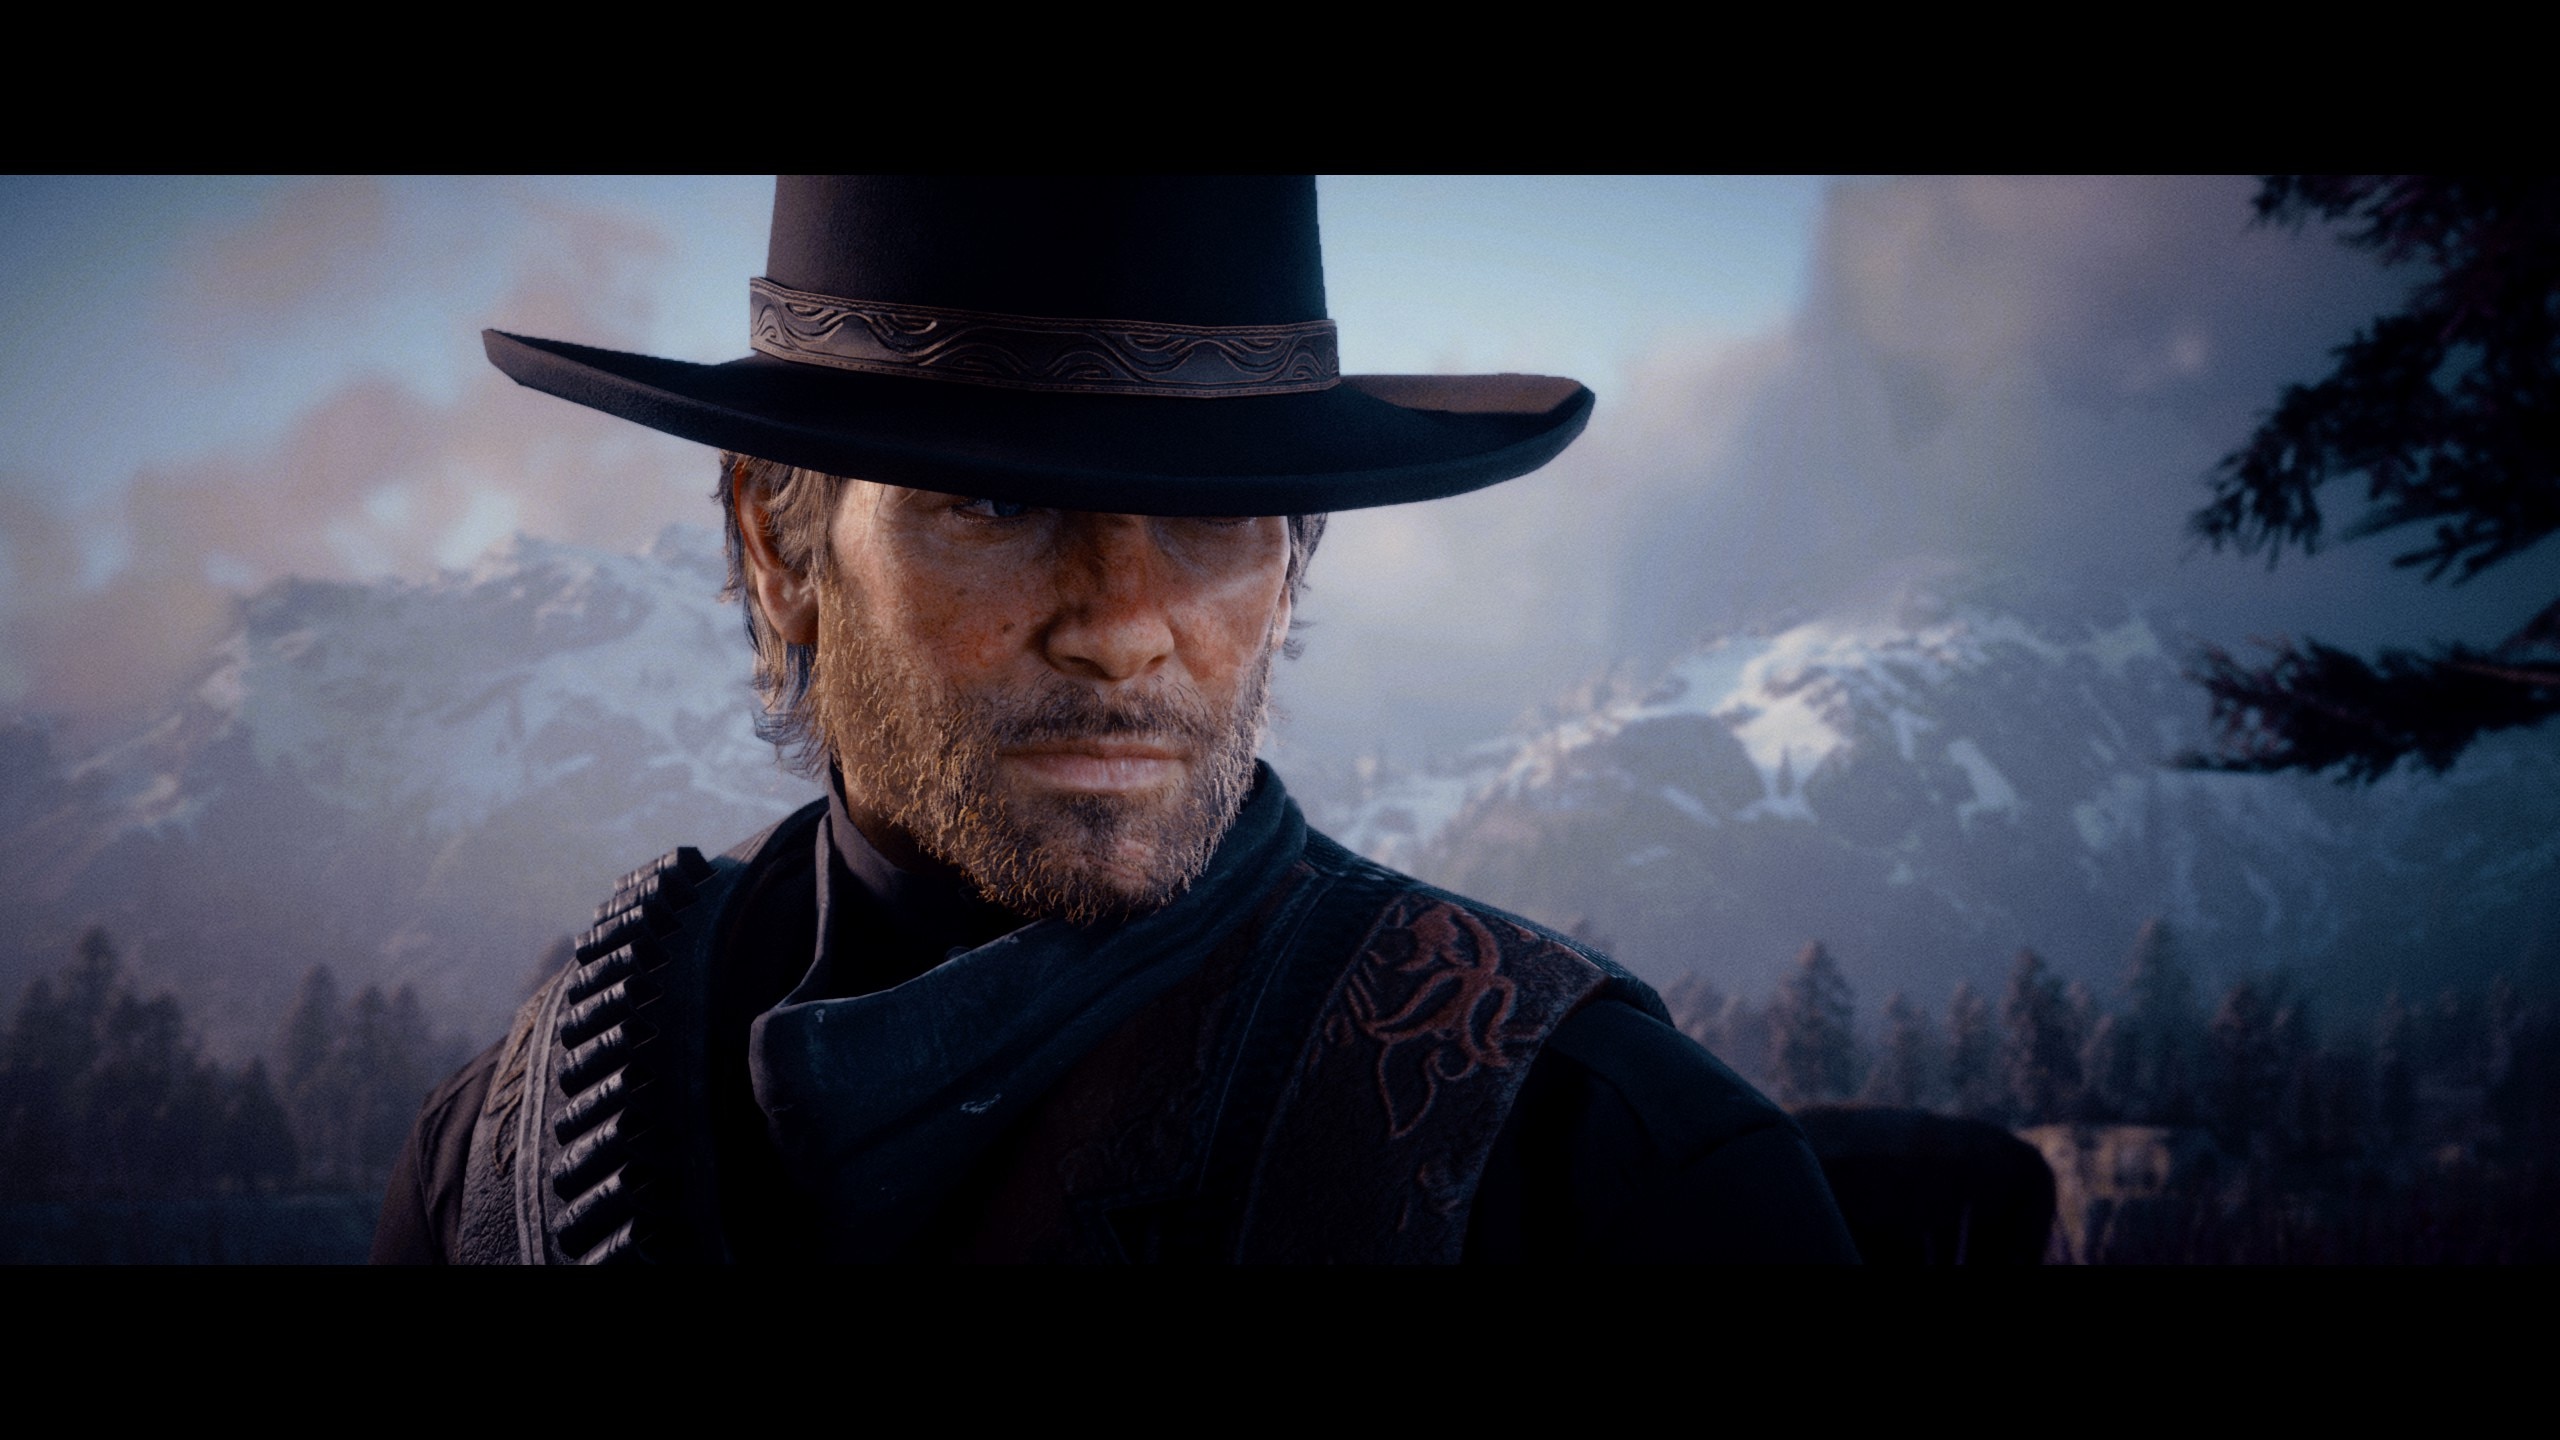 General 2560x1440 Arthur Morgan PC build Red Dead Redemption digital art video games Red Dead Redemption 2 video game characters CGI hat men with hats video game men beard video game art screen shot one eye obstructed trees looking away mountains snowy mountain clouds closed mouth depth of field